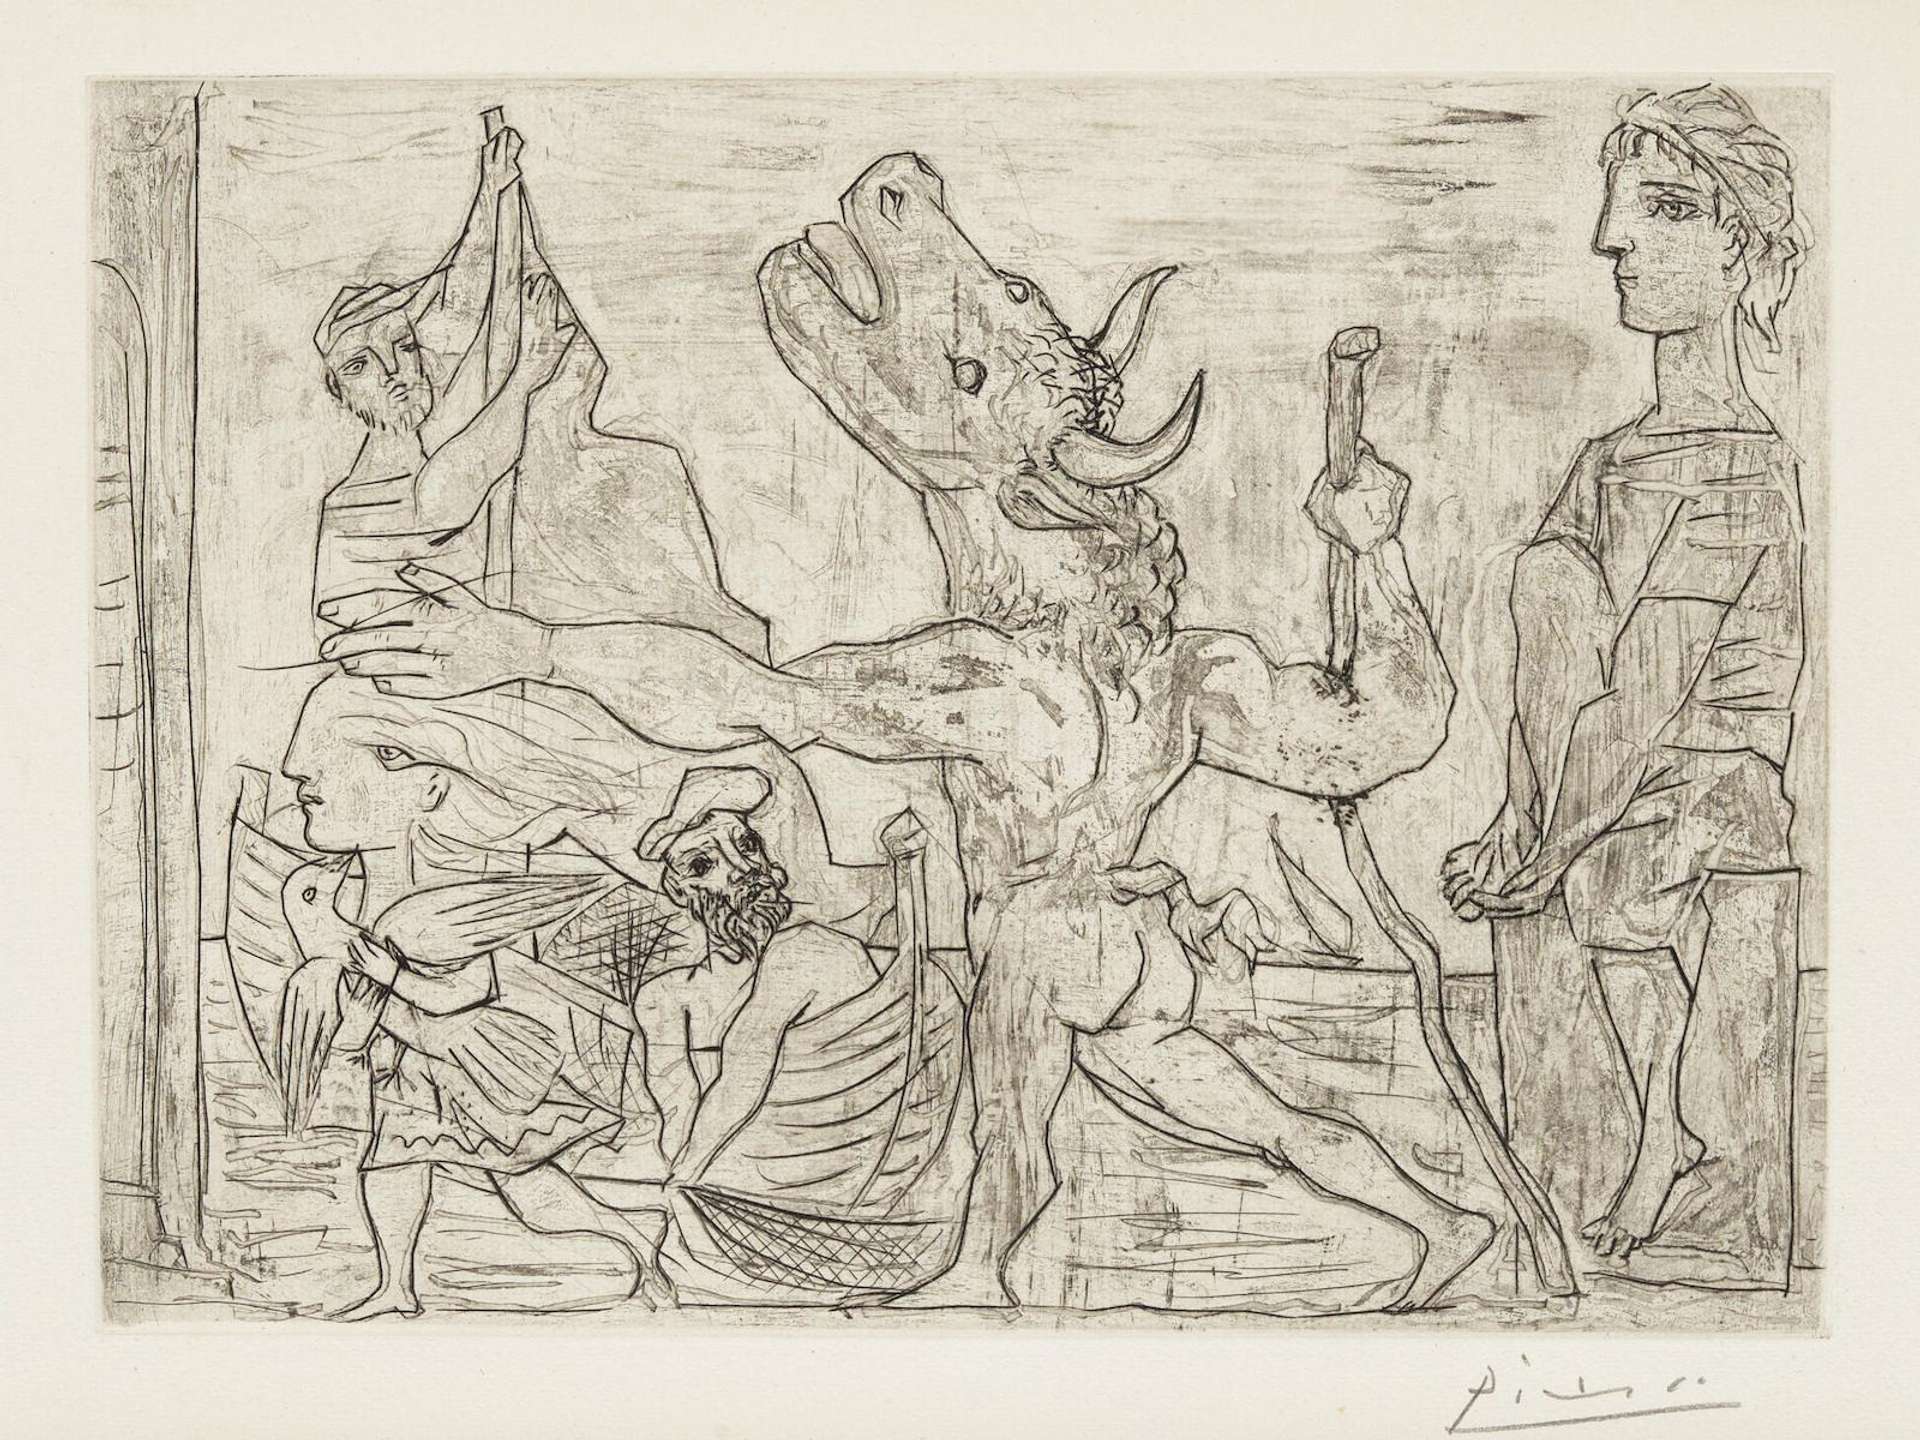 This print by Pablo Picasso shows a group of figures, including a Minotaur, being guided by a young girl holding a dove.